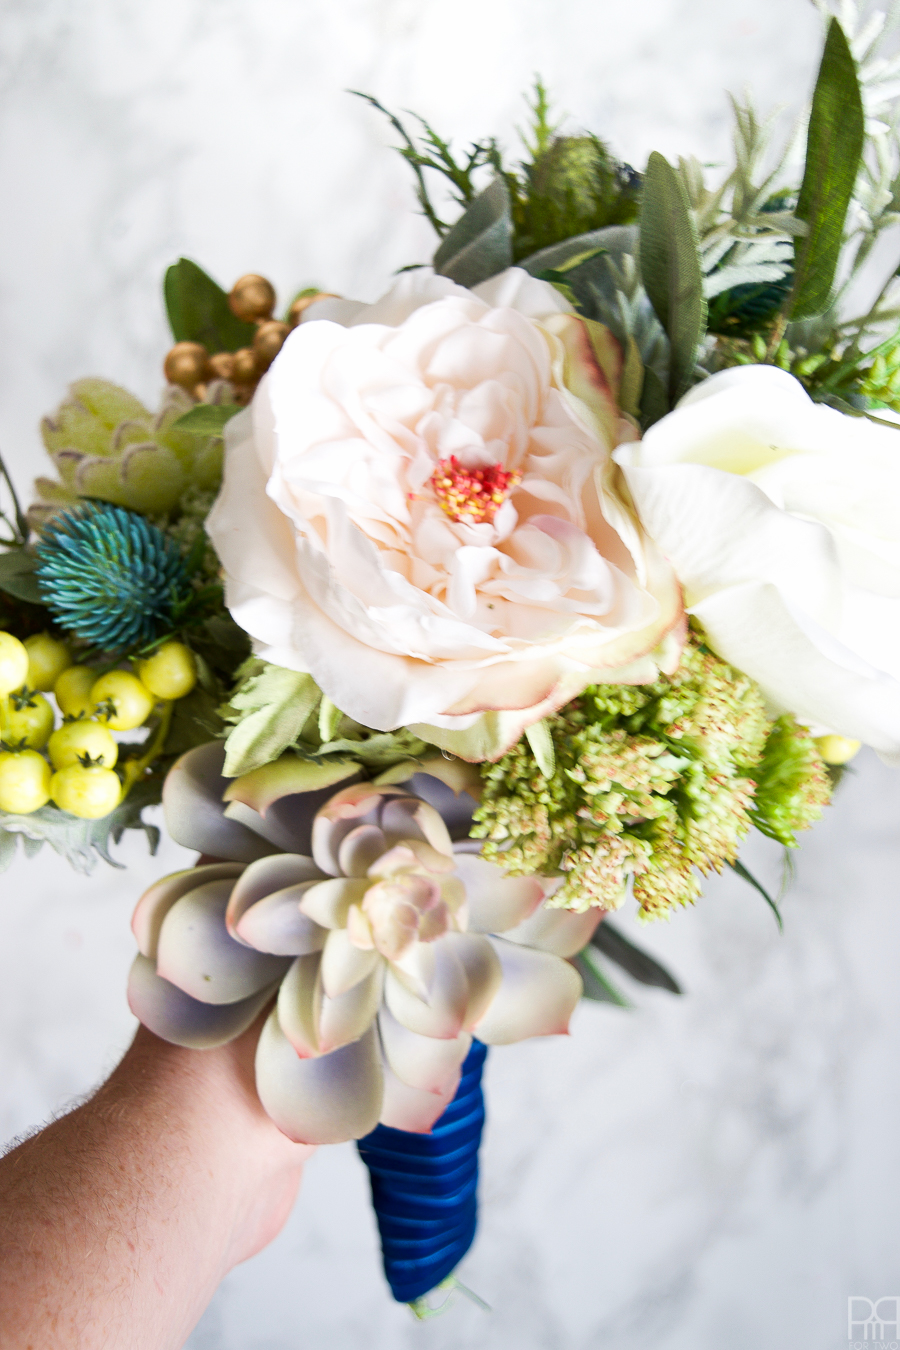 I made a winter wedding bouquet using greens, pinks, and subtle shades of blue. Perfect for any winter nuptials!